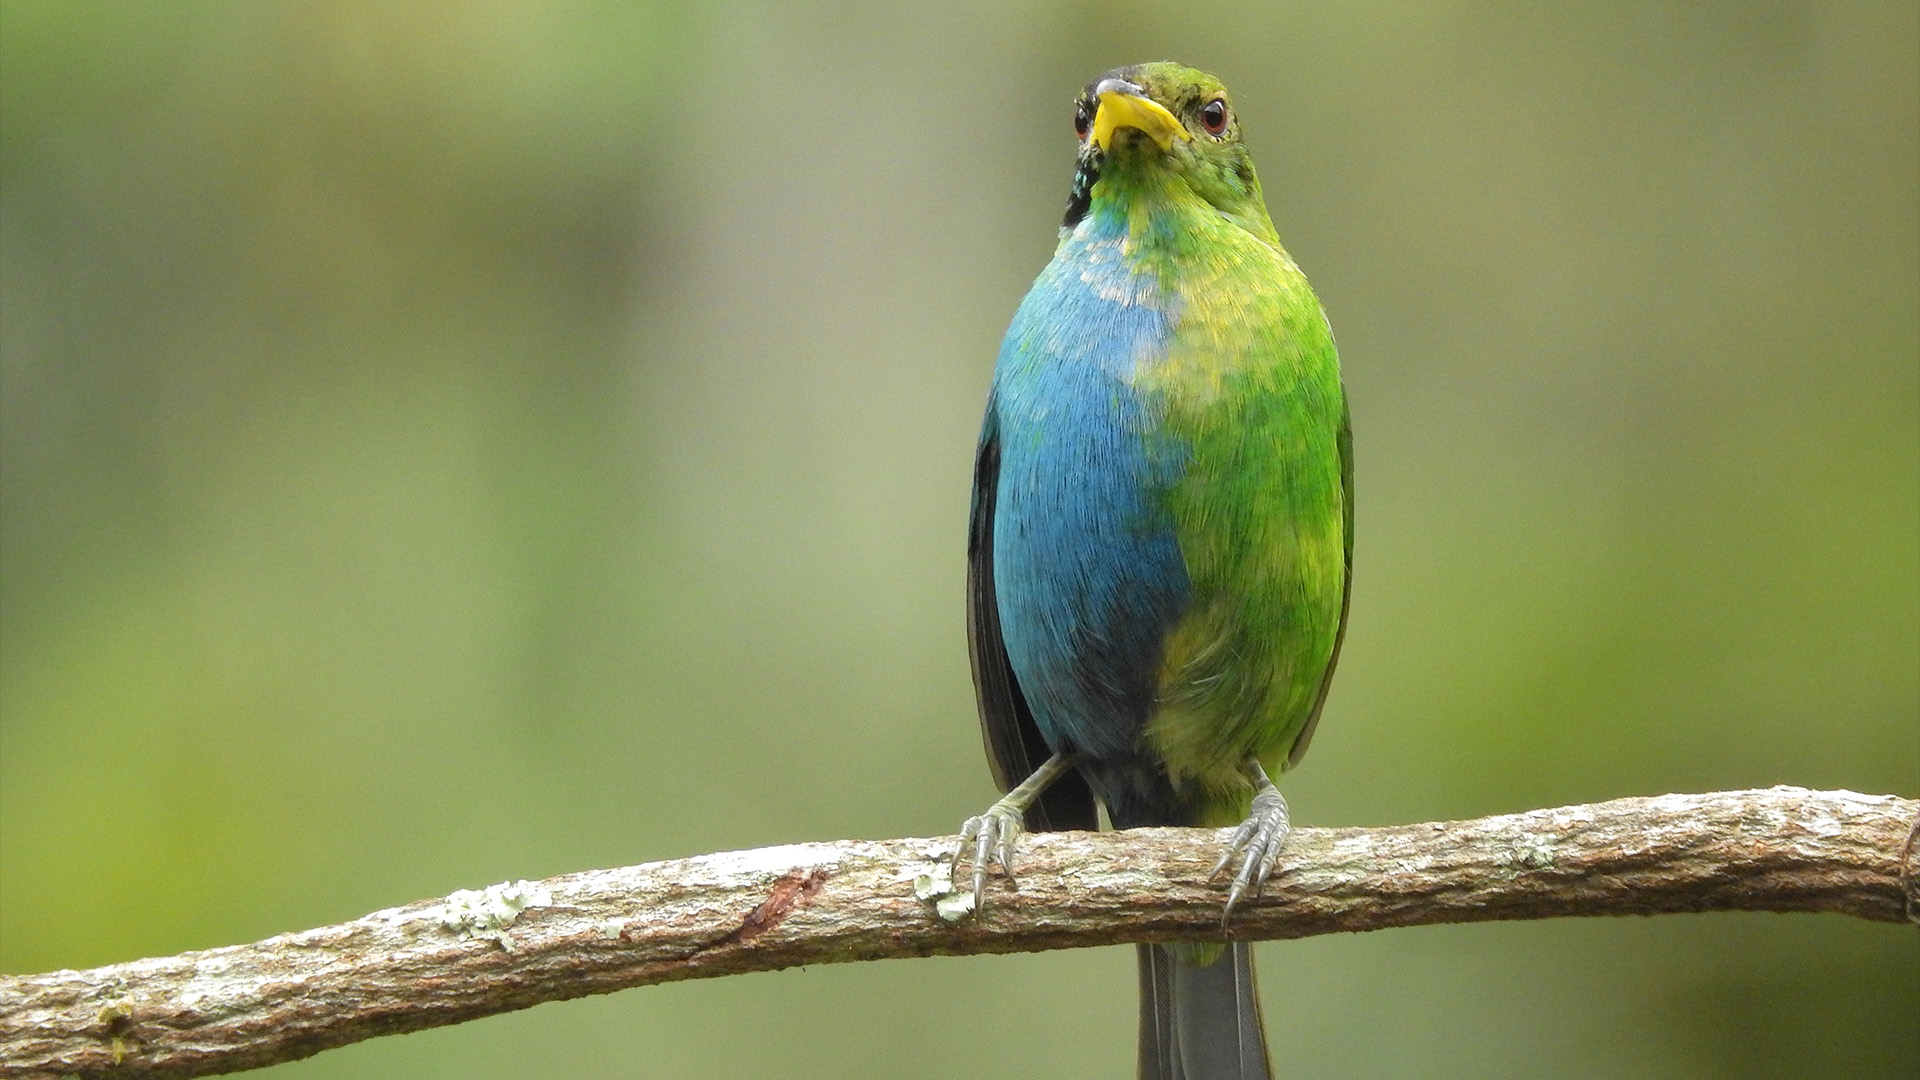 A photo showing how the green and blue bird's coloration is perfectly split down the midline of its belly